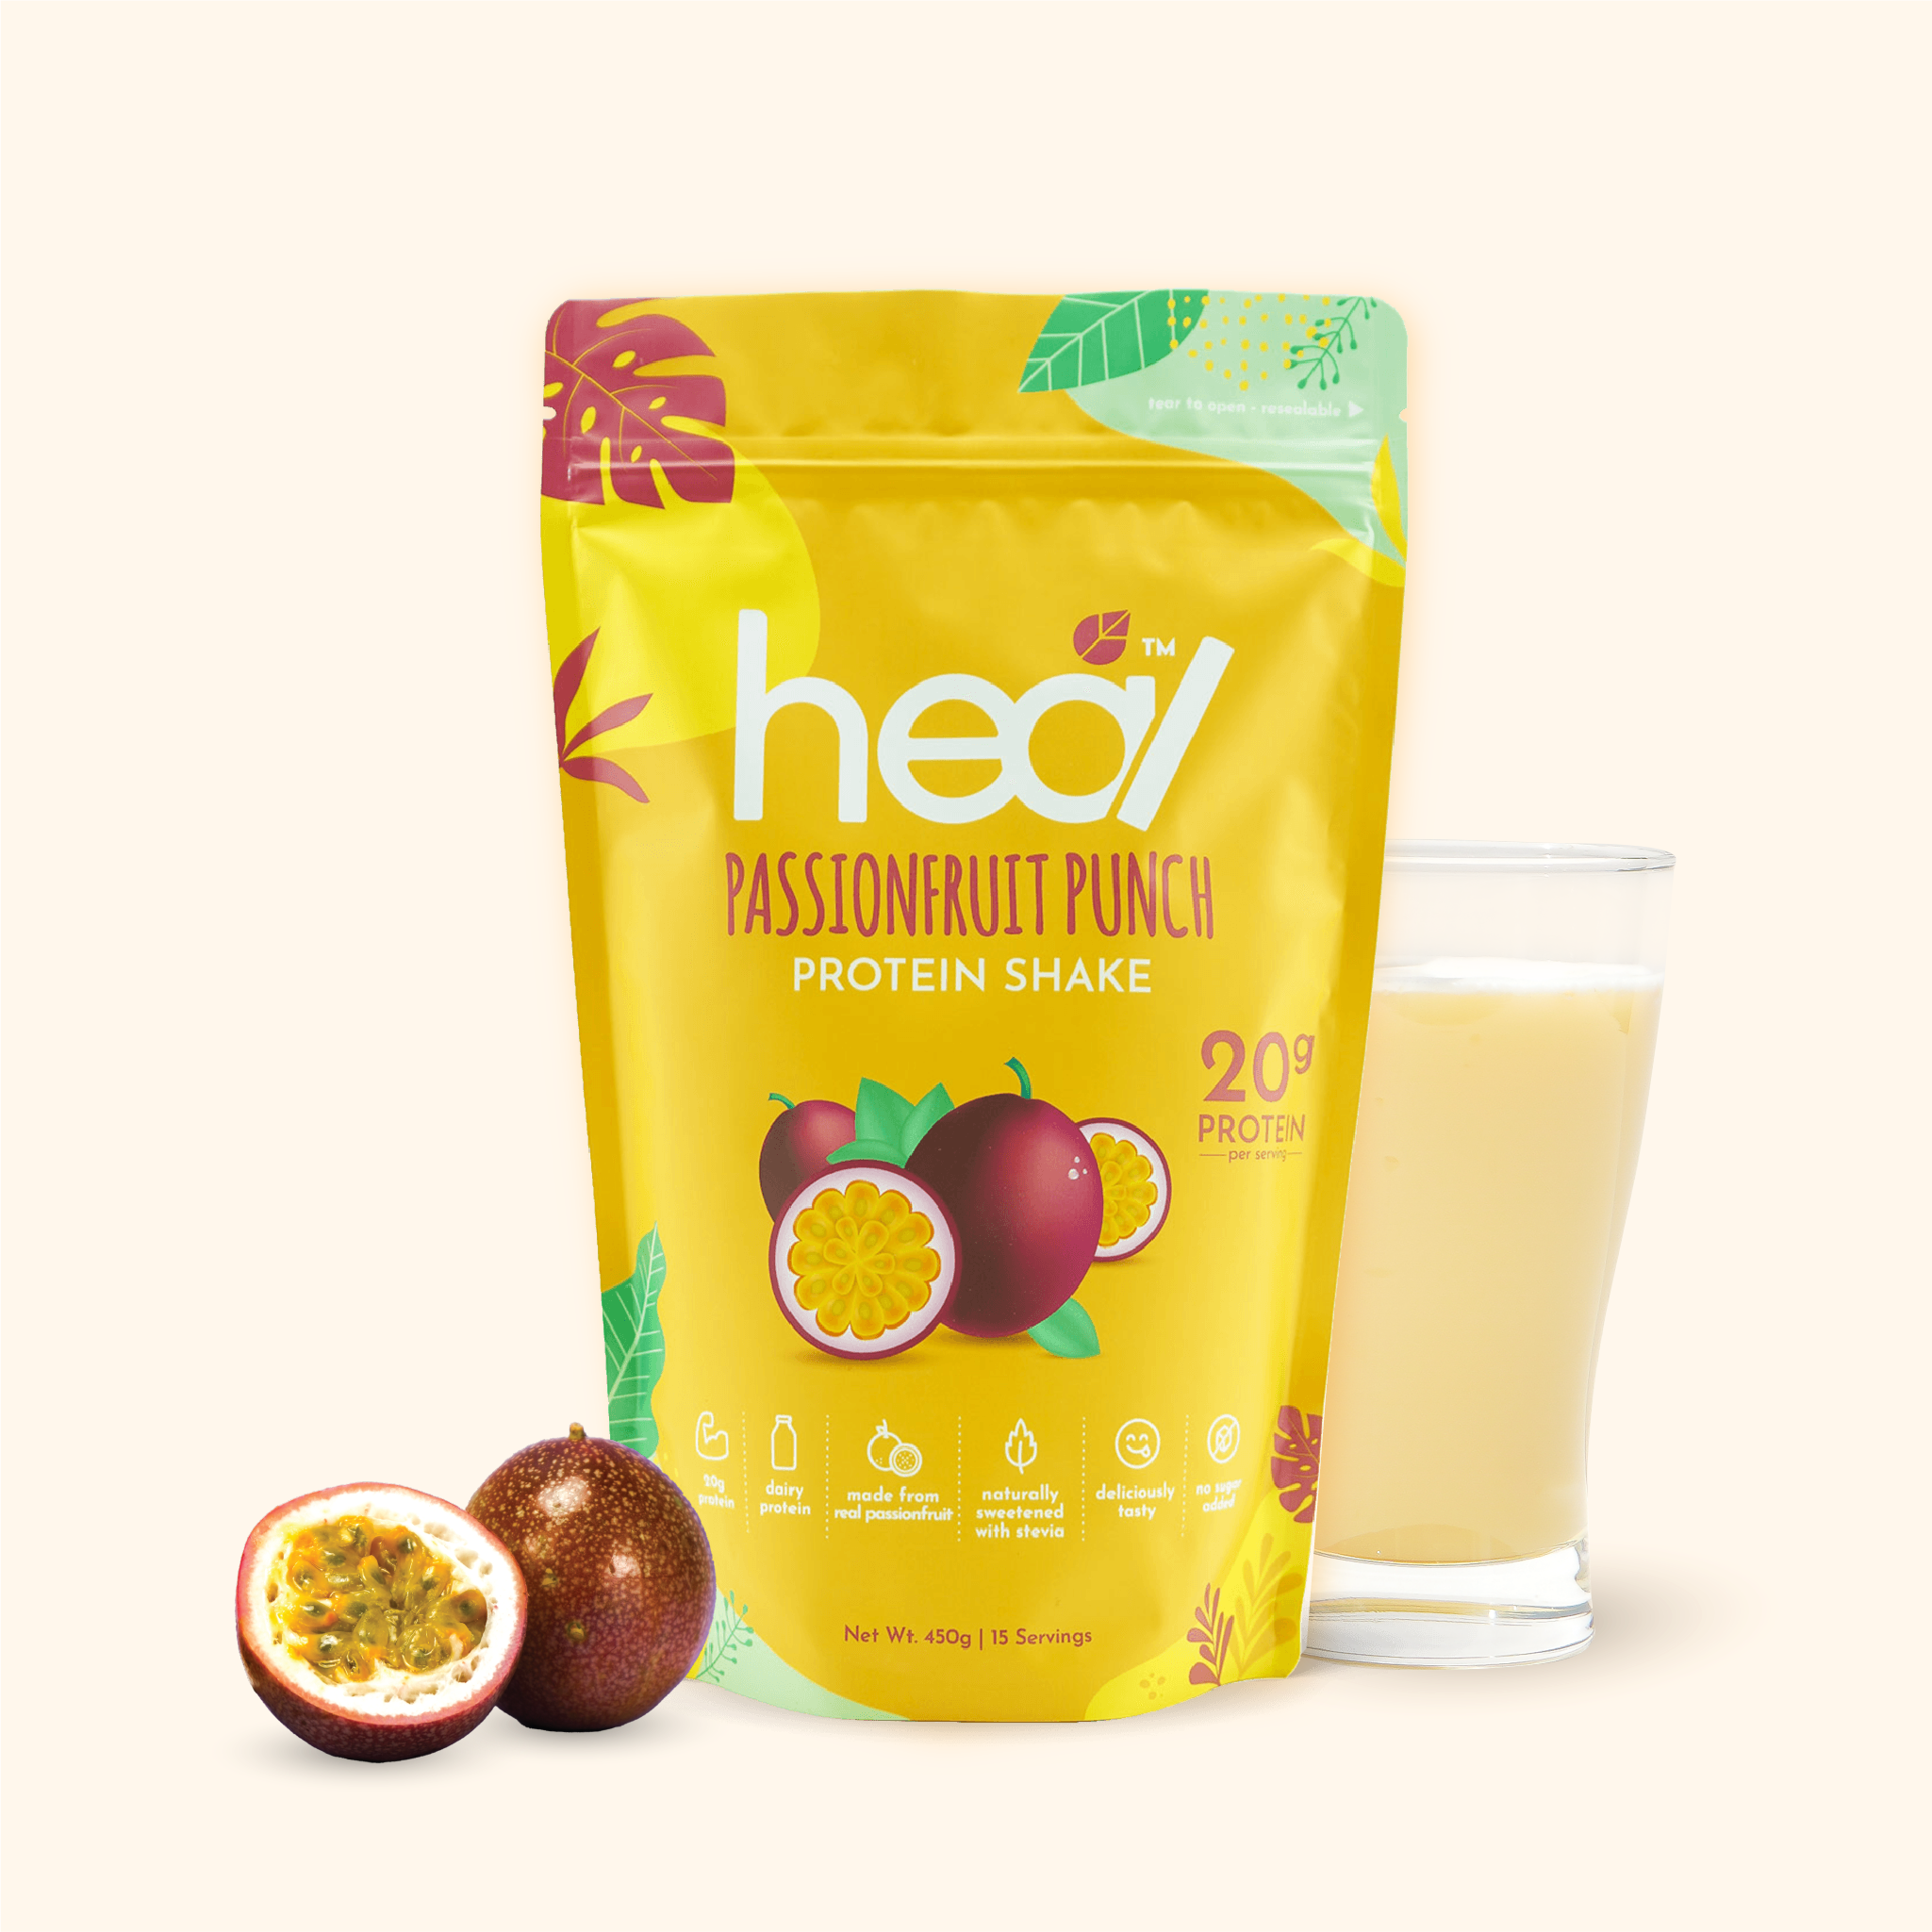 [Subscription Plan] Heal Passionfruit Punch Protein Shake, 15 Servings Value Pack